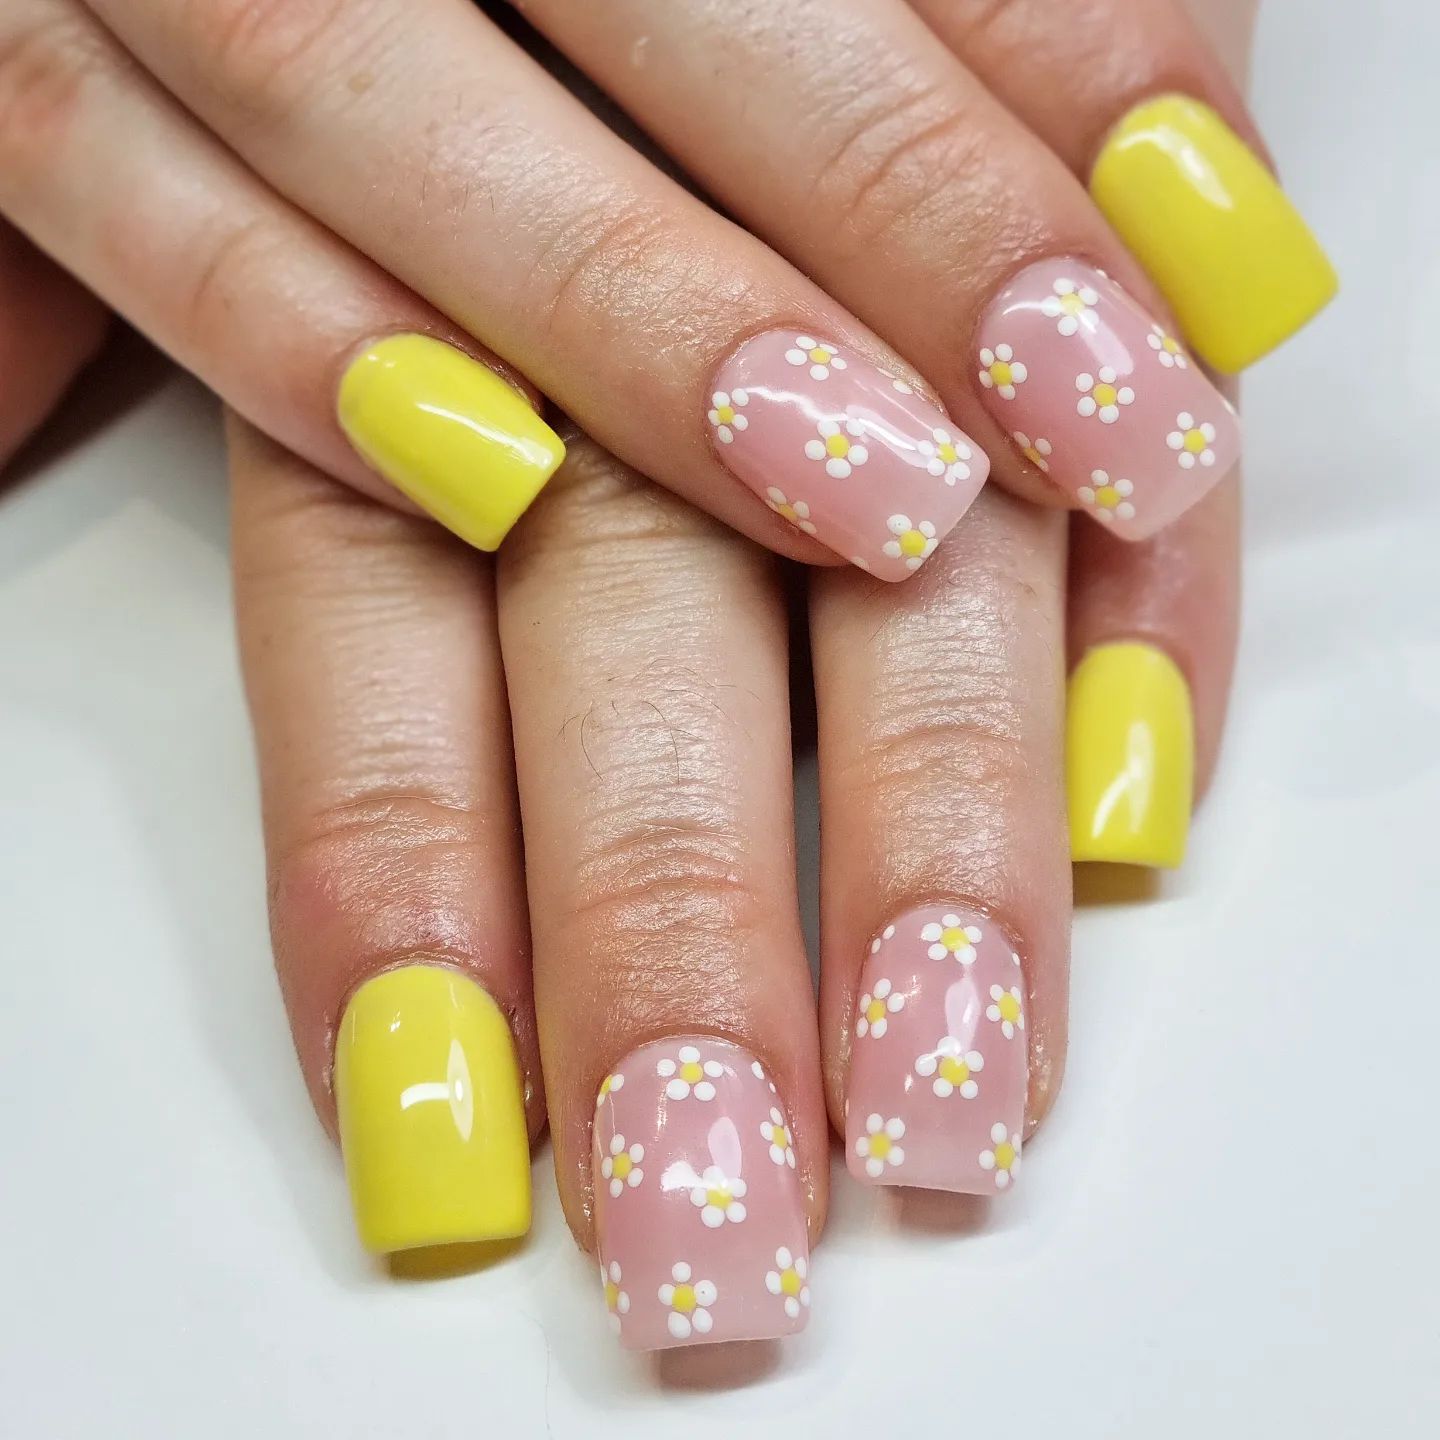 A bright and shiny yellow nail polish is enough to match beautiful white daisies with. Try this nail design out.